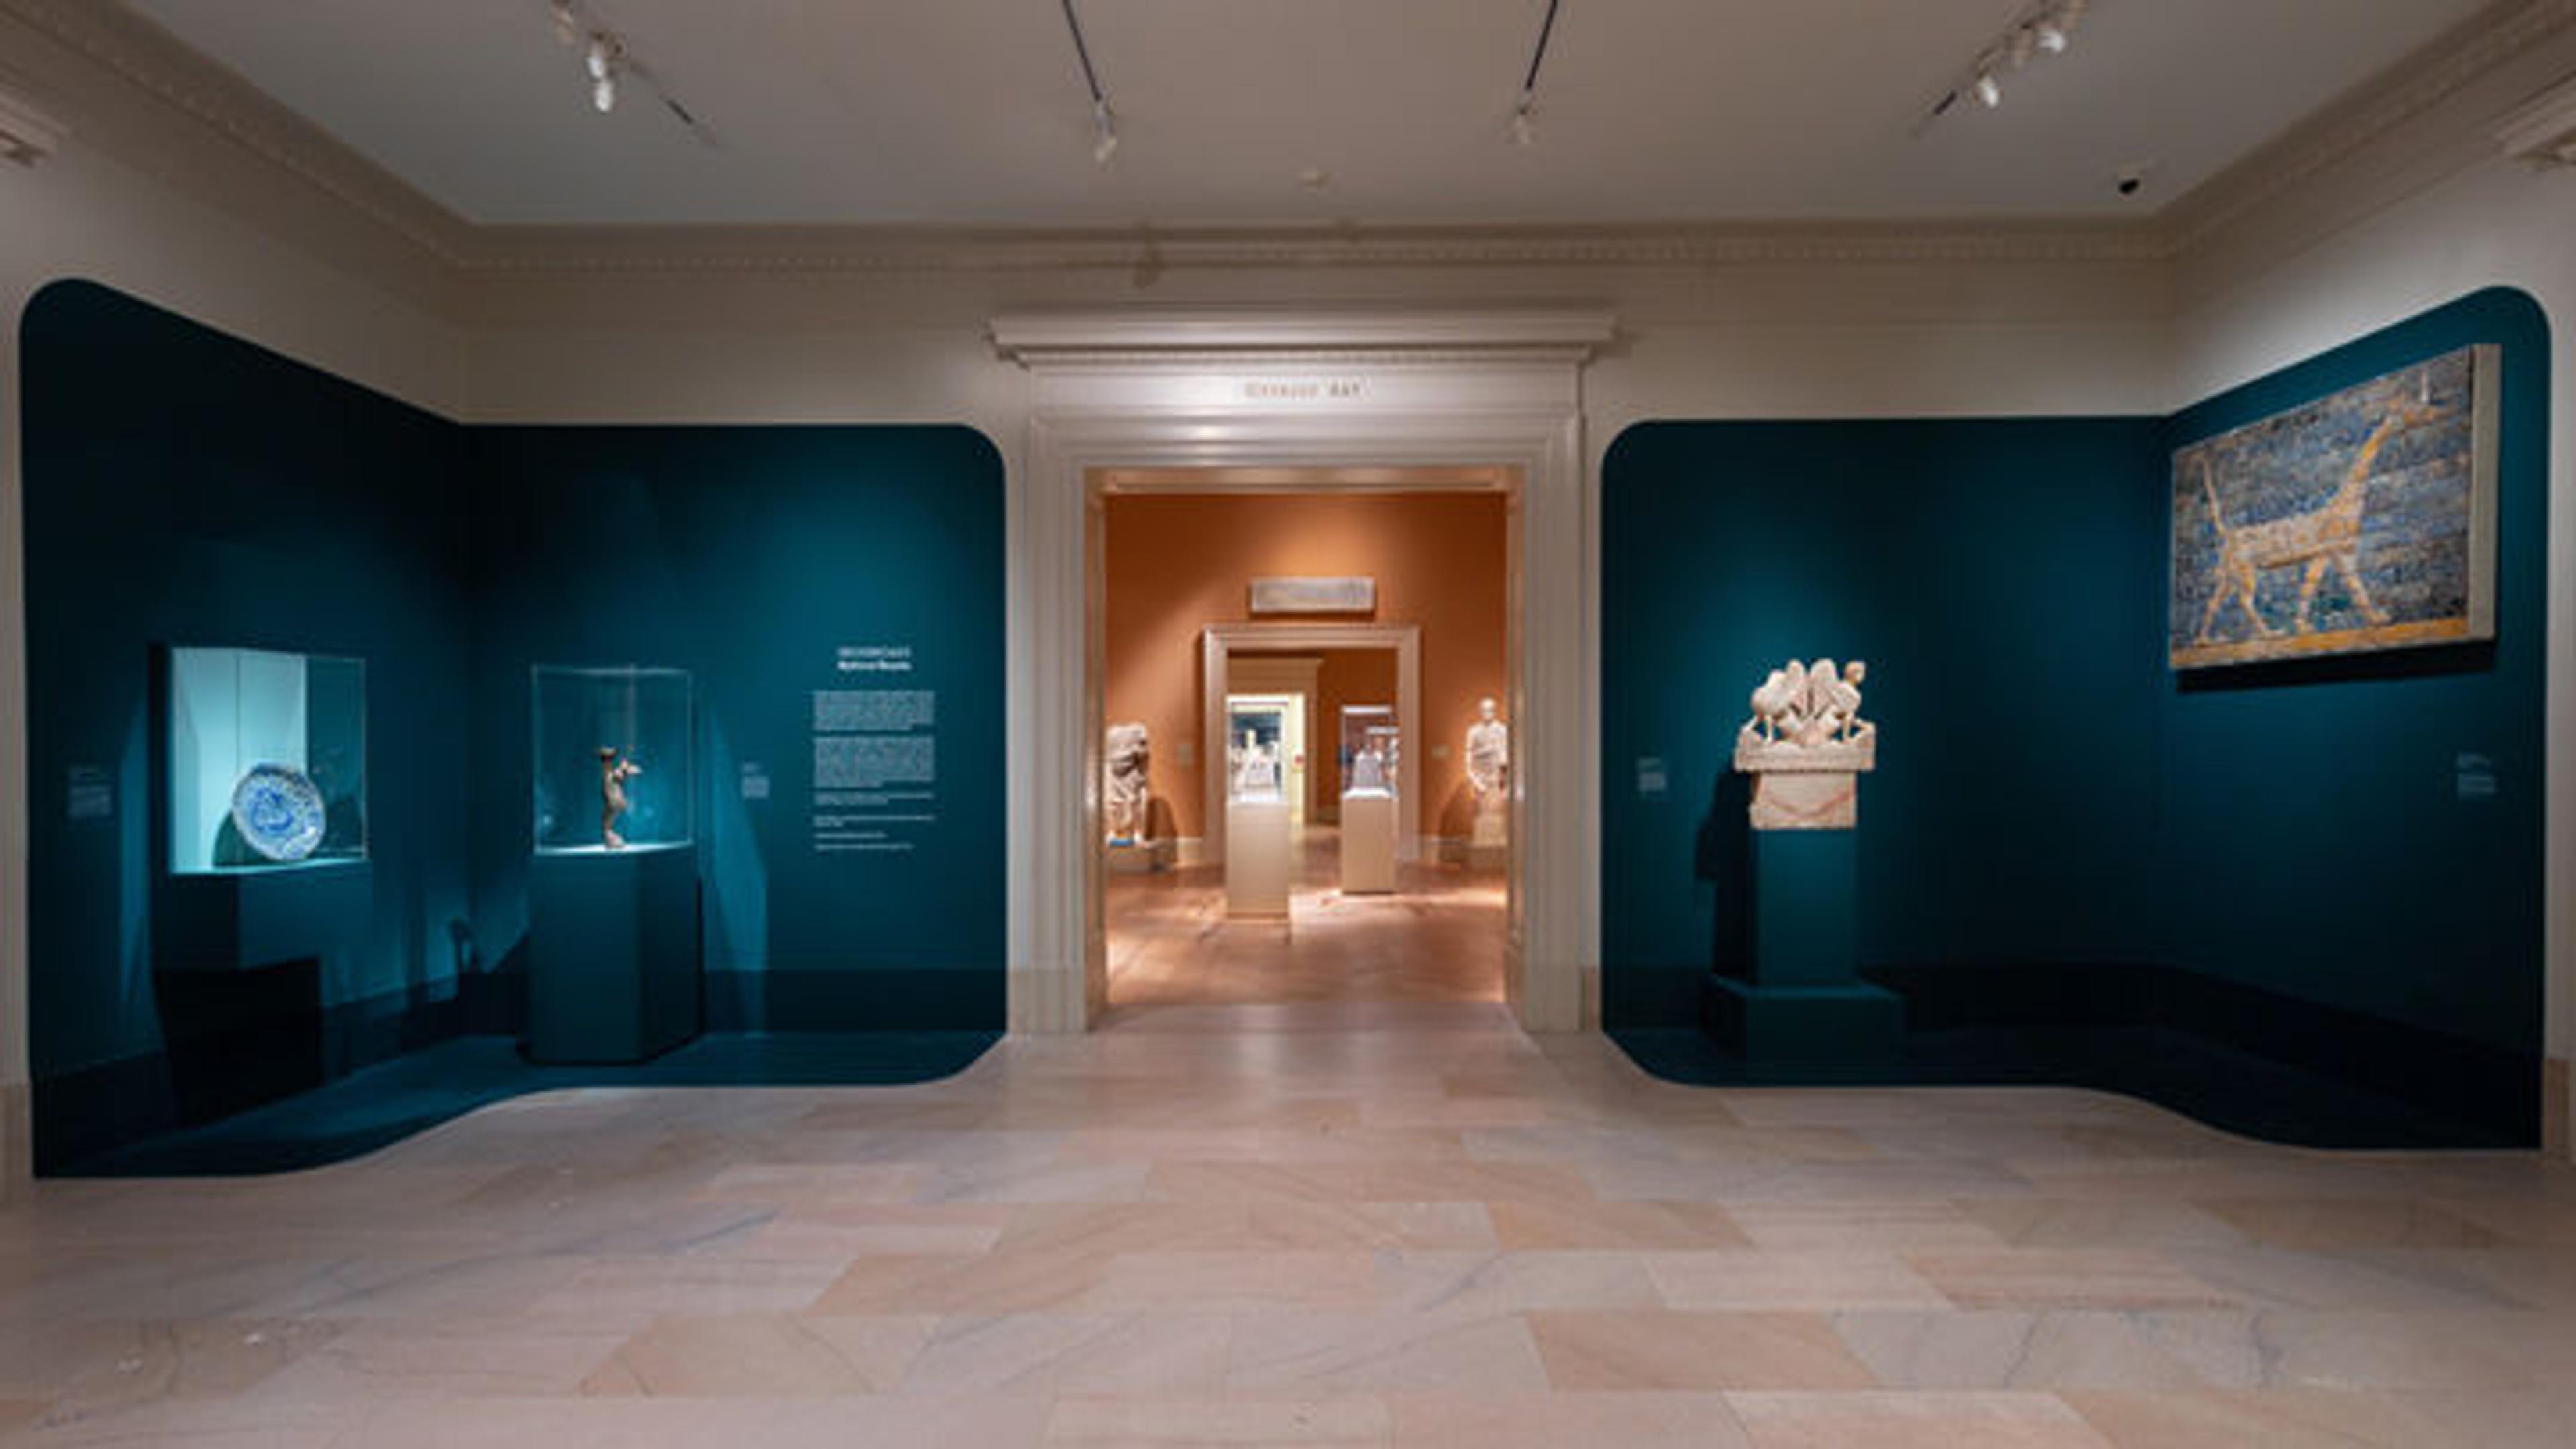 A view of a blue gallery with four objects hung on the walls